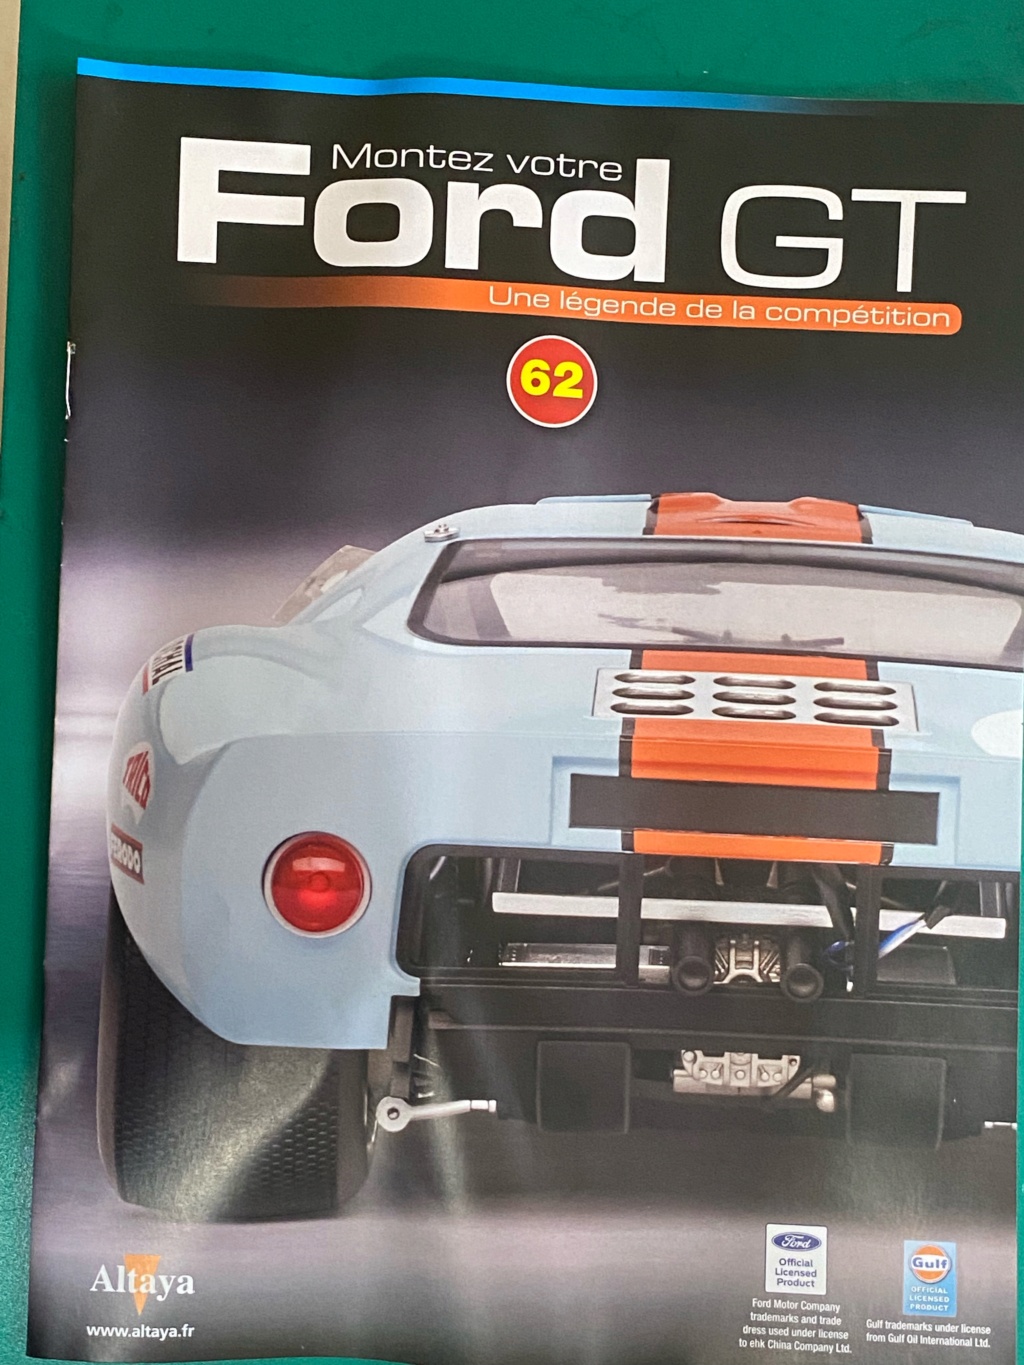 Ford GT40 [Altaya 1/8°] de Grenouille1954 - Page 2 F4092610